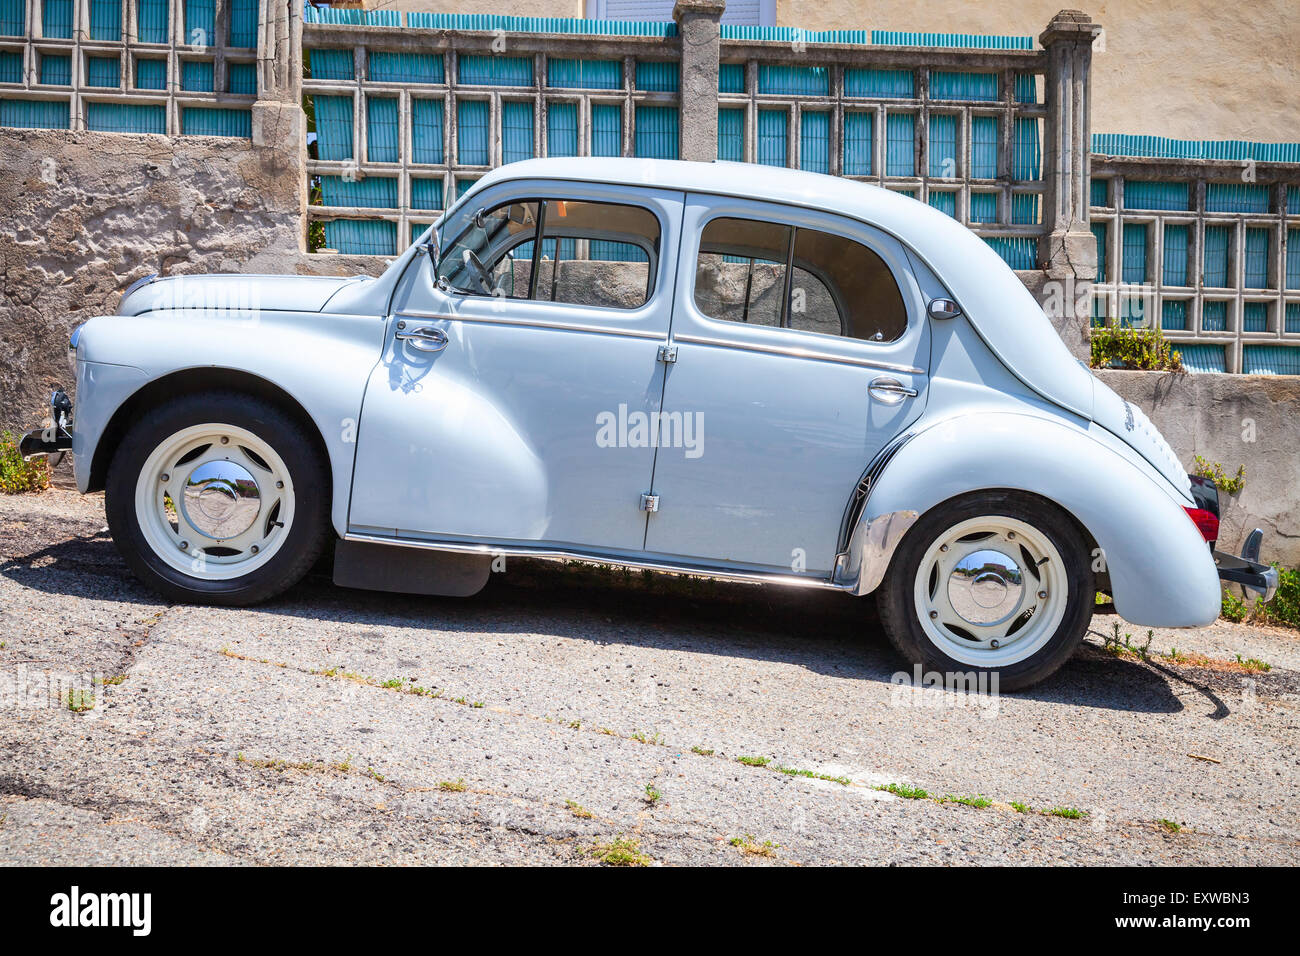 Ajaccio, France - July 6, 2015: Light blue Renault 4CV old-timer economy car stands parked on a roadside in French town, side vi Stock Photo